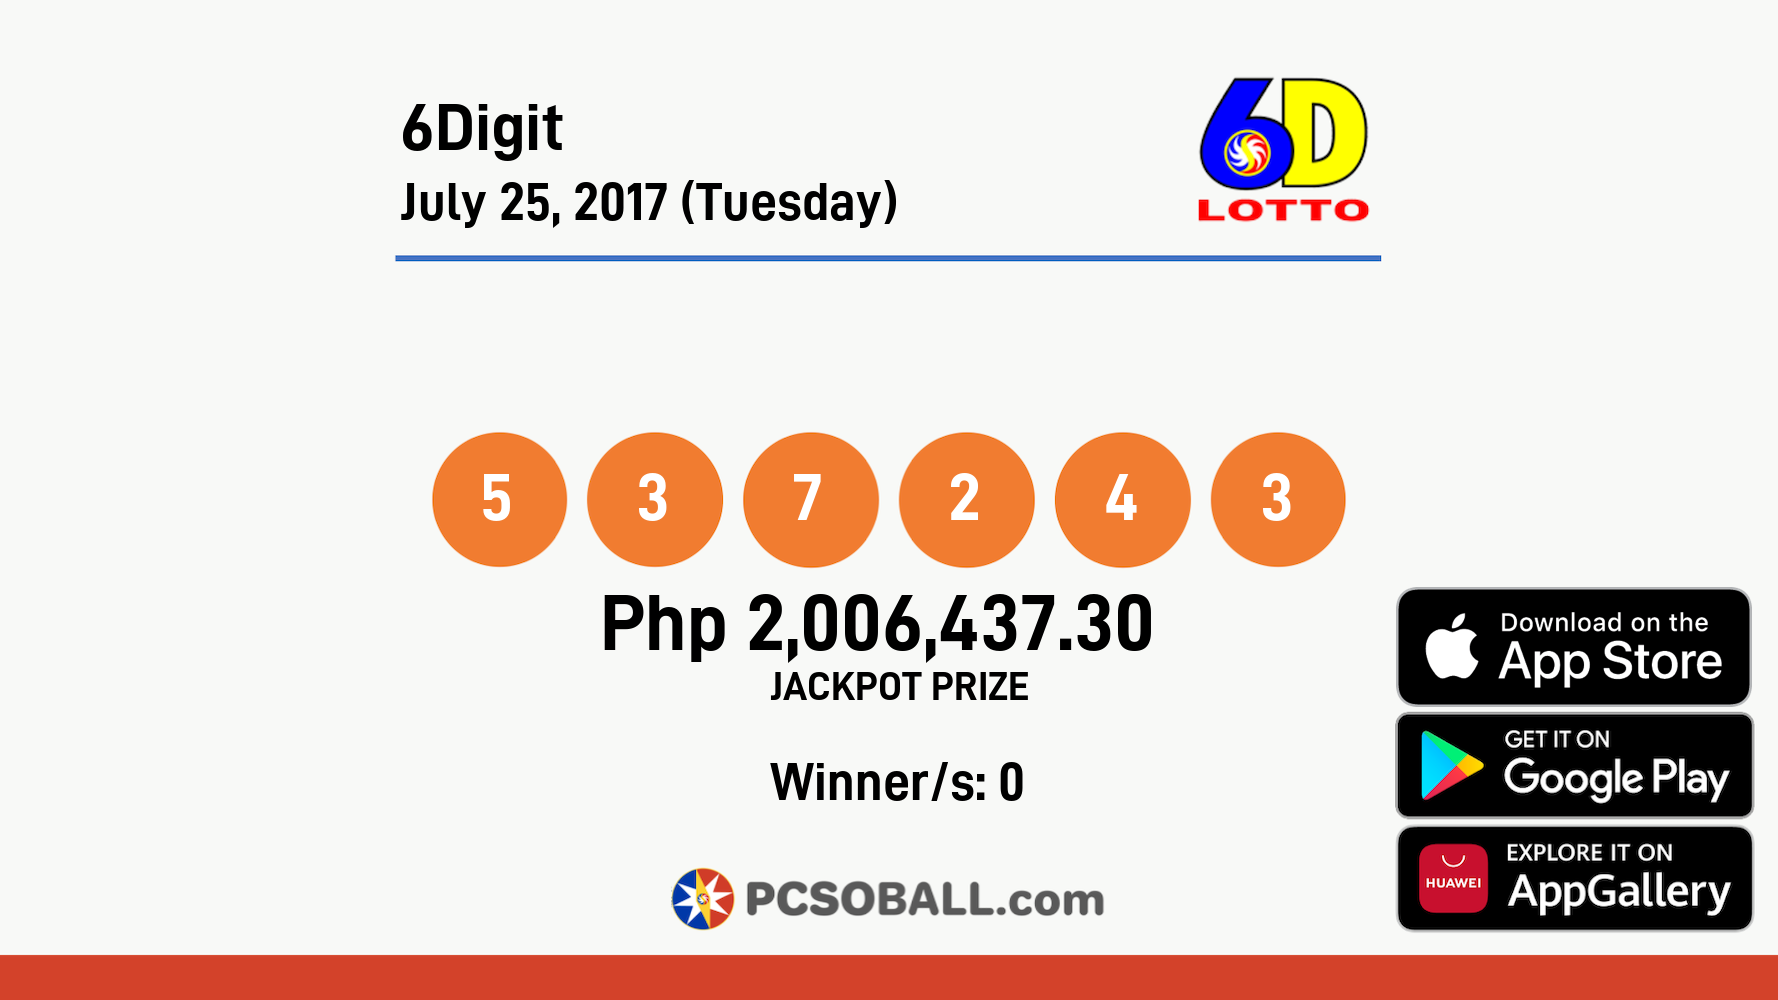 6Digit July 25, 2017 (Tuesday) Result